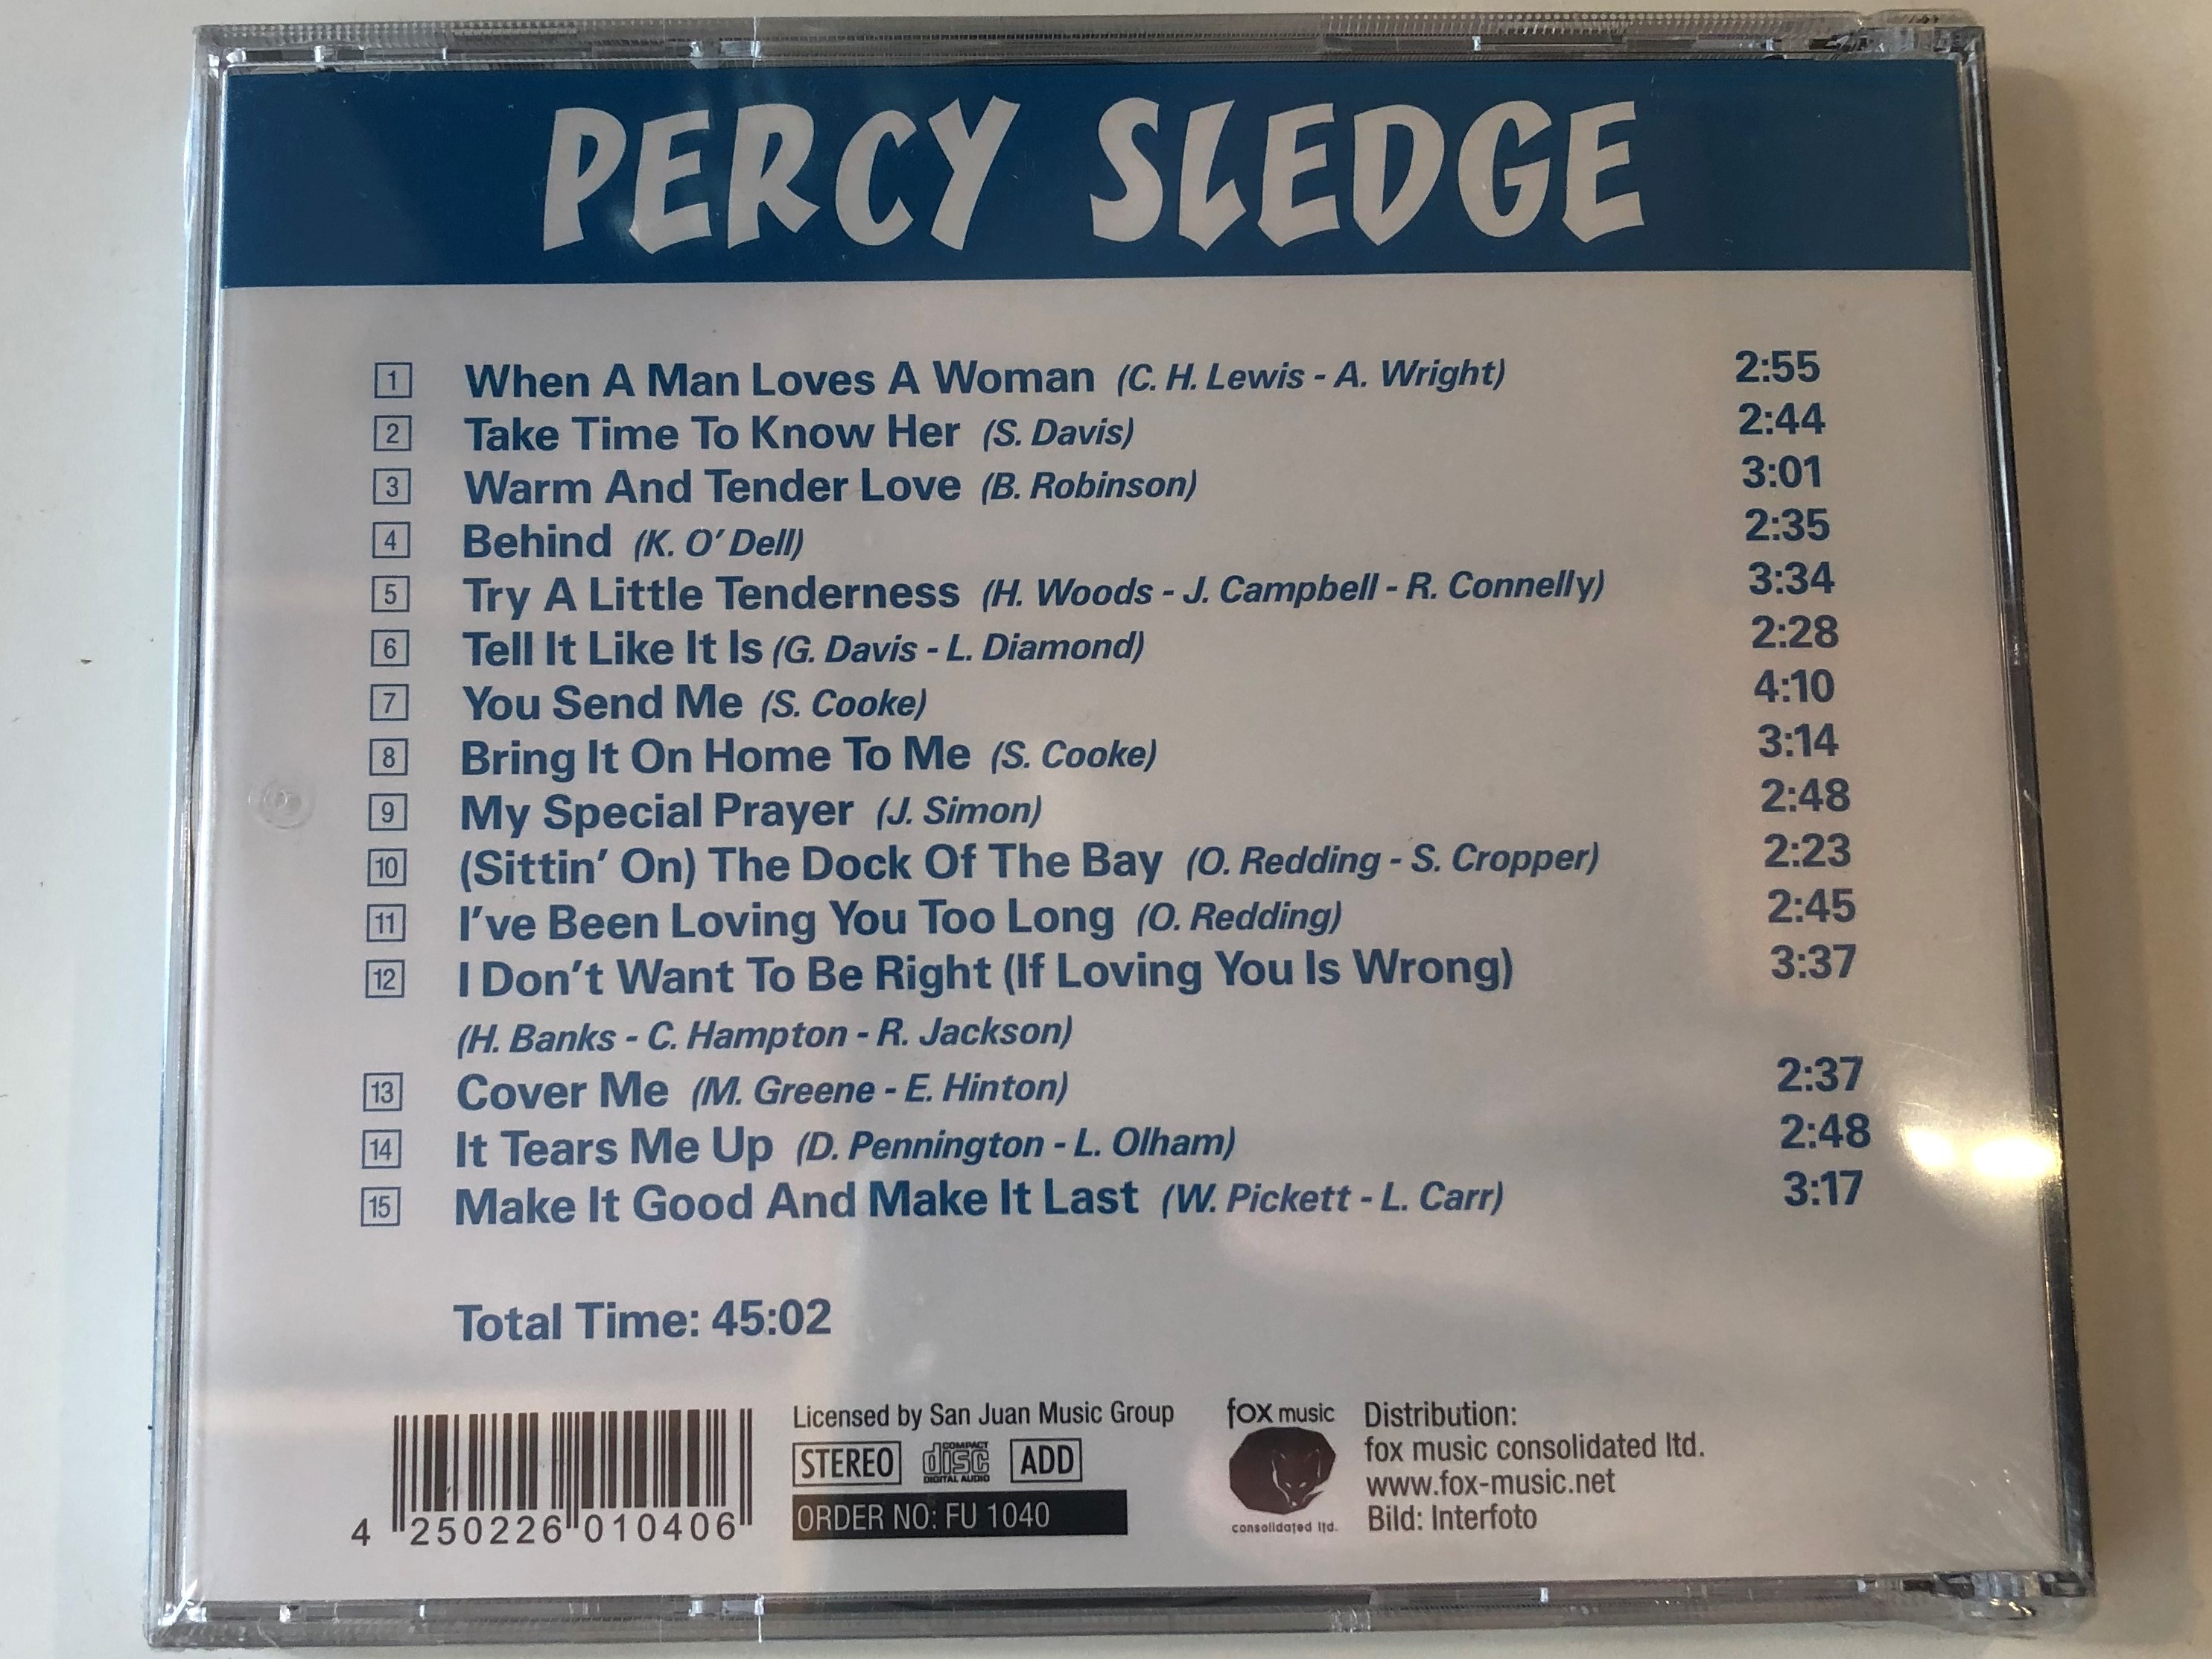 percy-sledge-when-a-man-loves-a-woman-it-tears-me-up-tell-it-like-it-is-try-a-little-tenderness-many-more-fox-music-consolidated-ltd.-audio-cd-fu-1040-2-.jpg